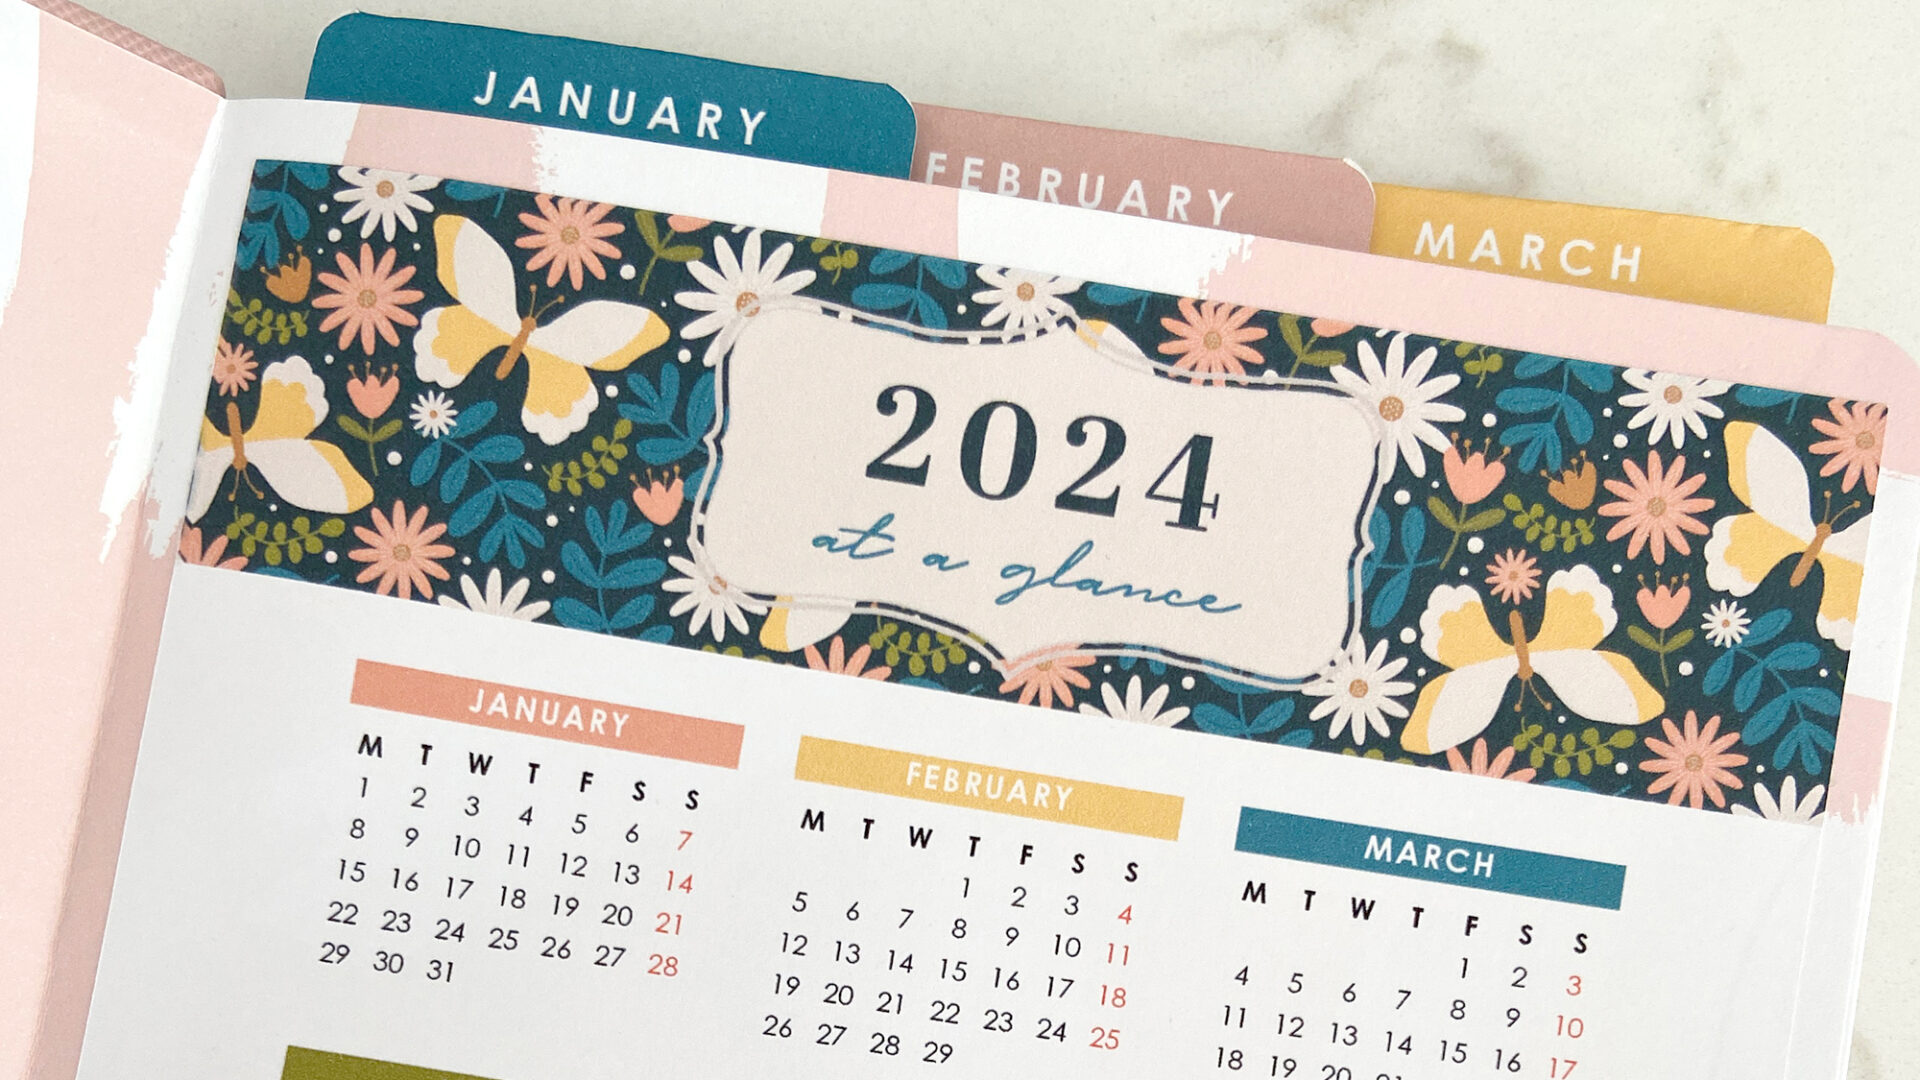 2024 Bullet Journal: Organize Time, Create Habits, Live Happy